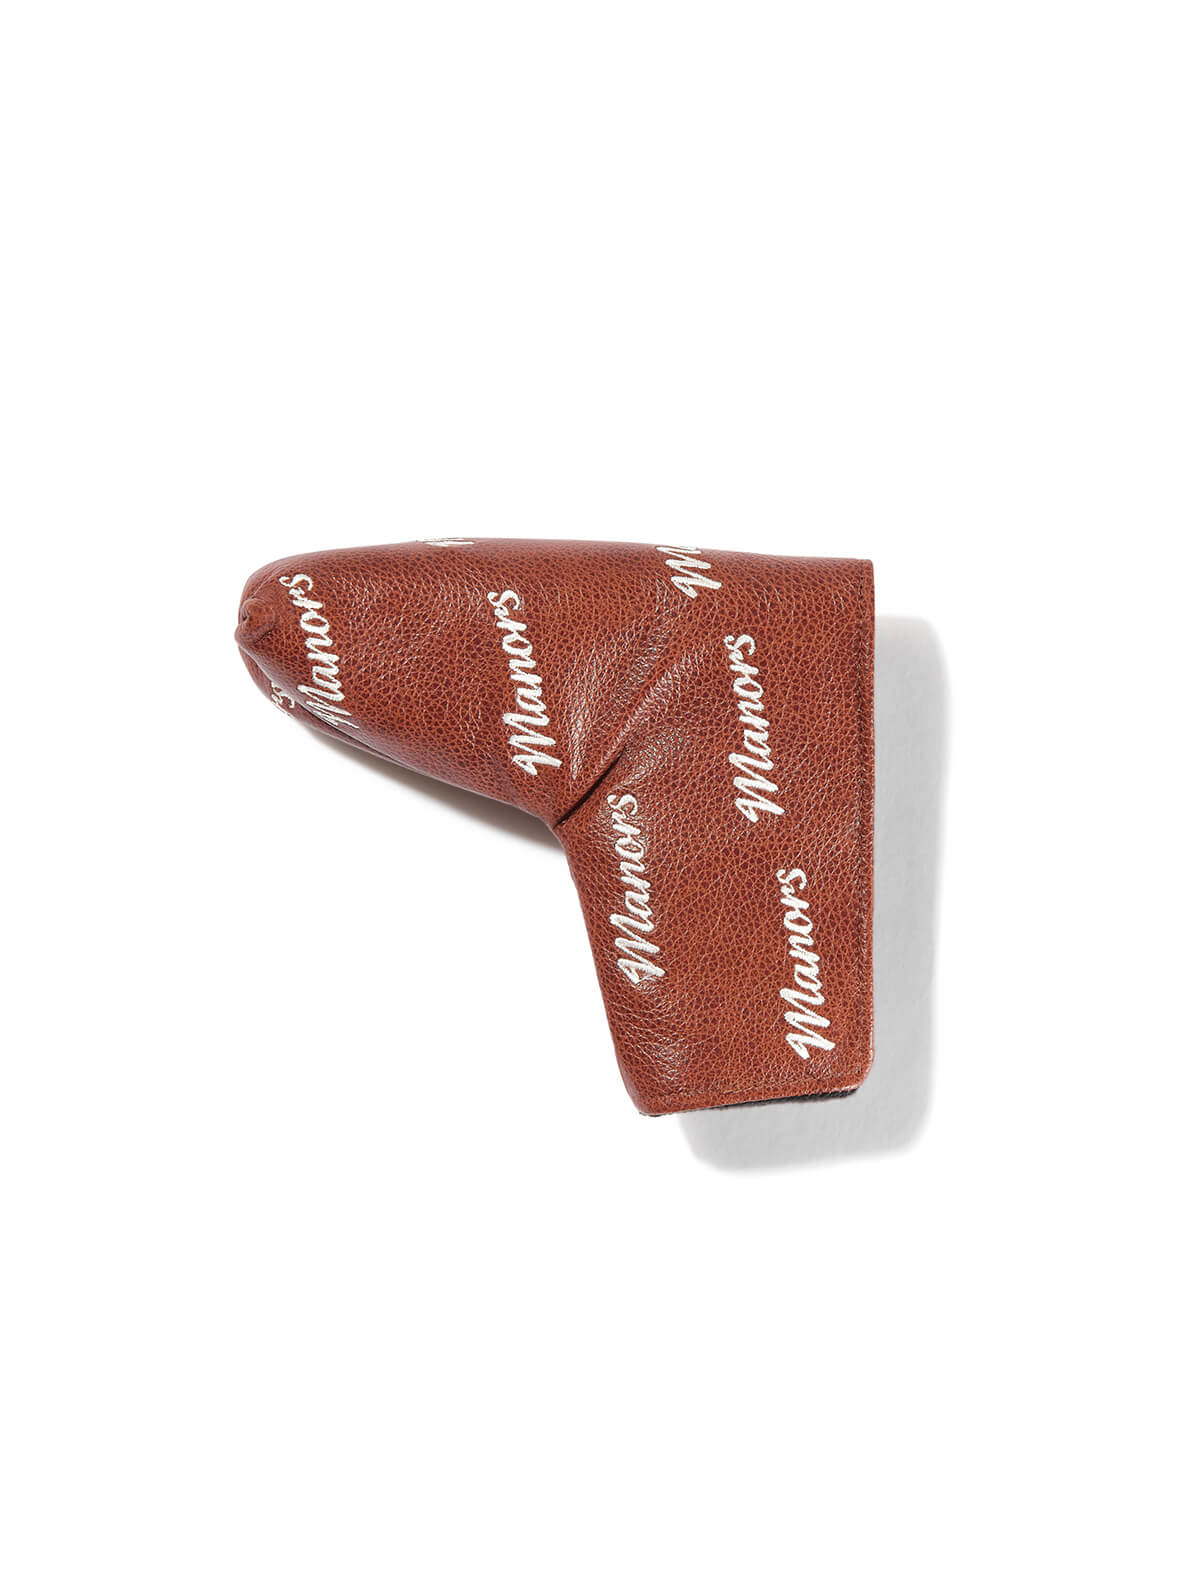 MANORS GOLF Leather Putter Cover in Brown